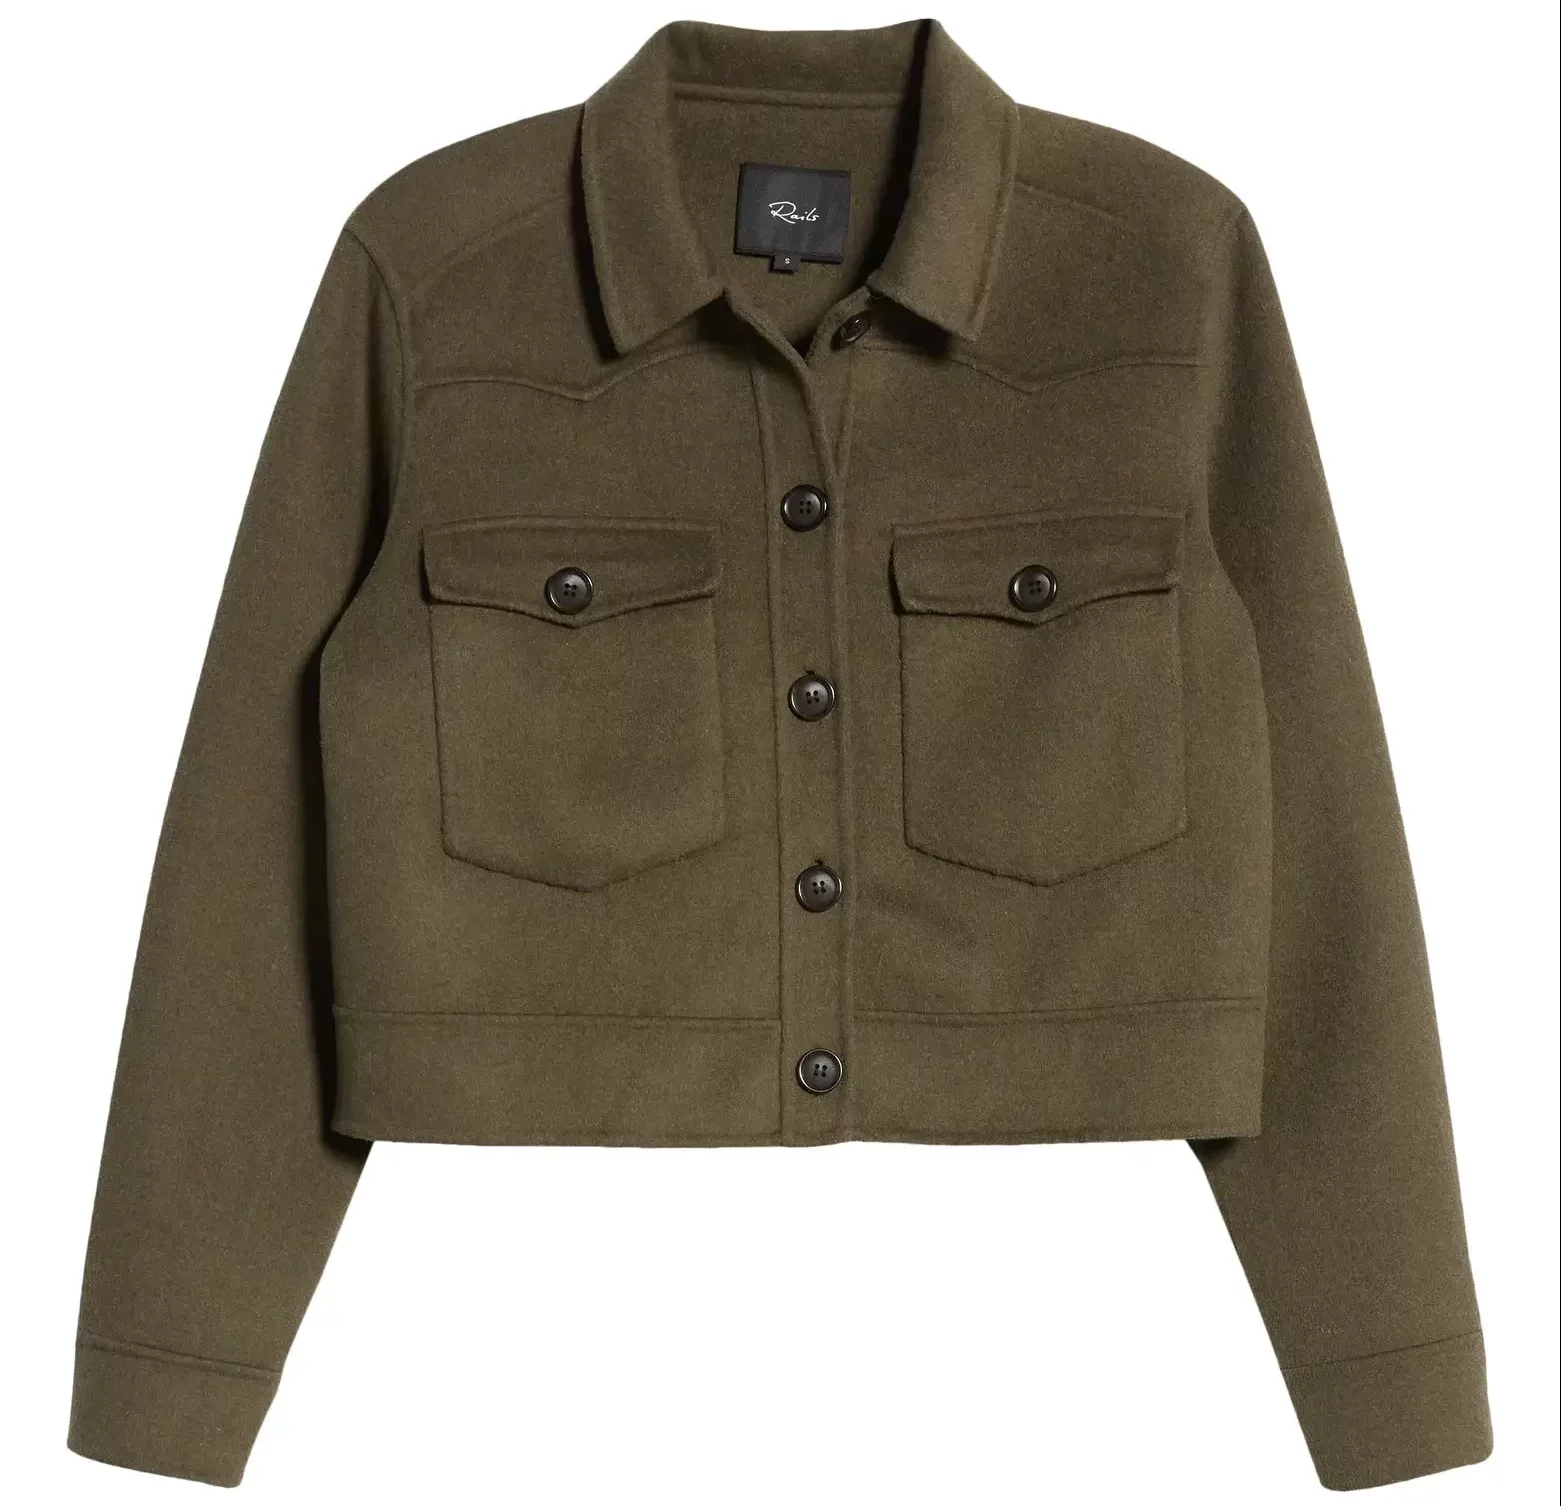 Stylist Pick Of The Week Round Up cropped shirt jacket fun jacket for winter Nashville stylists share favorite winter pieces personal stylists share favorite winter jackets 